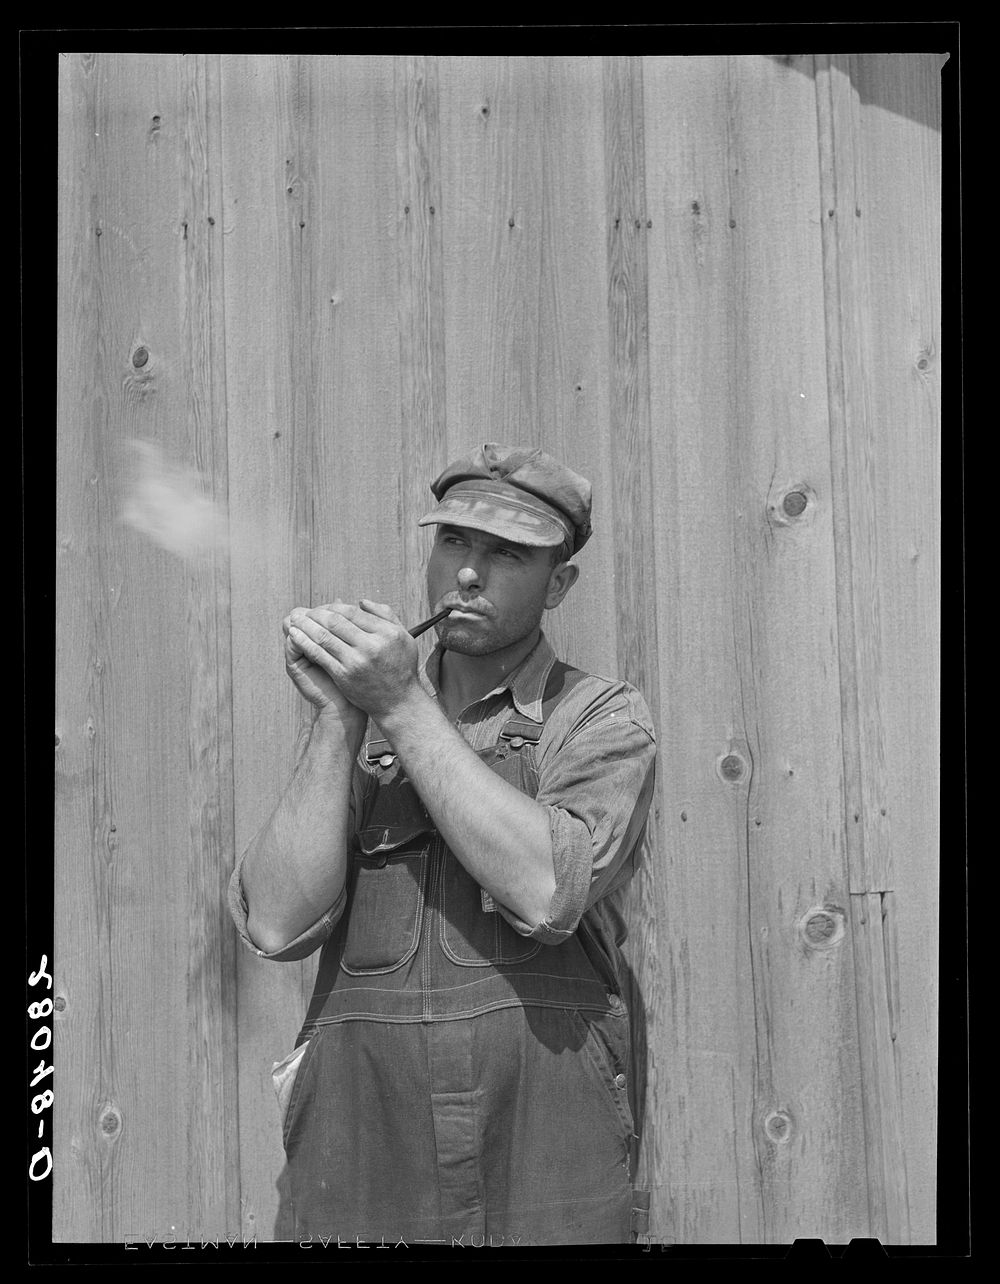 [Untitled photo, possibly related to: Farmer. Jasper County, Iowa]. Sourced from the Library of Congress.